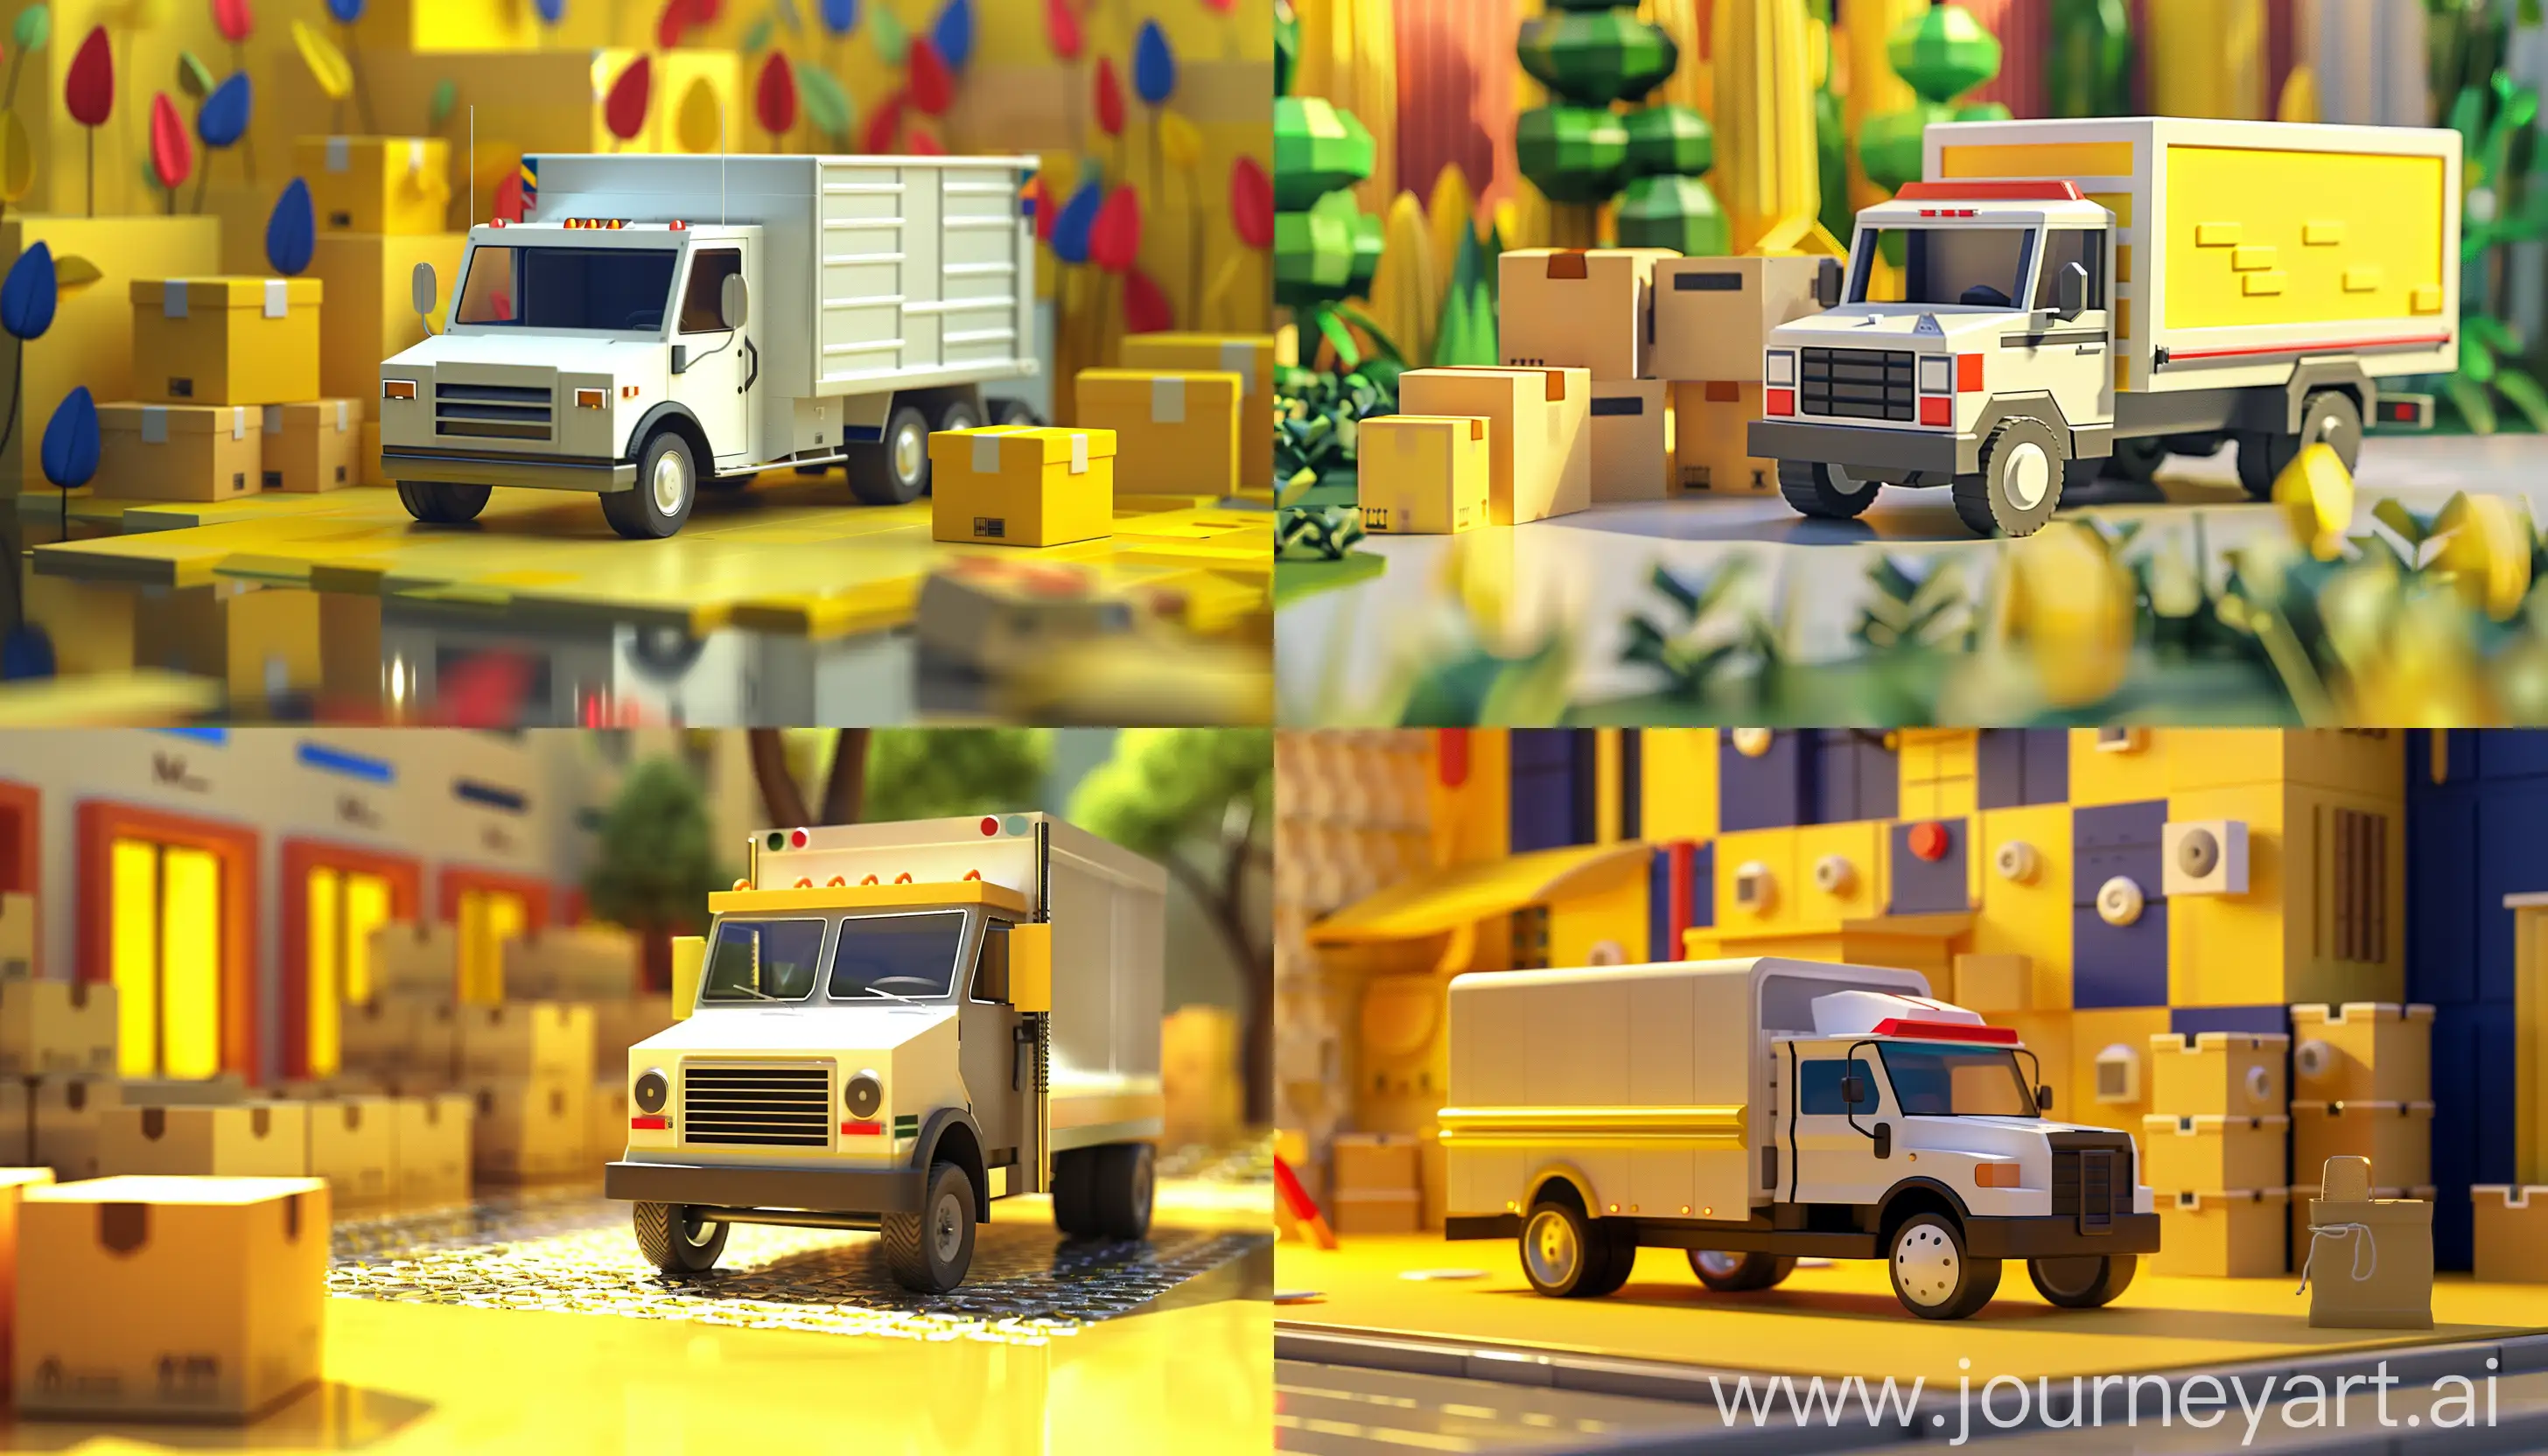 Efficient-Mail-Delivery-YellowThemed-Mail-Truck-and-Packages